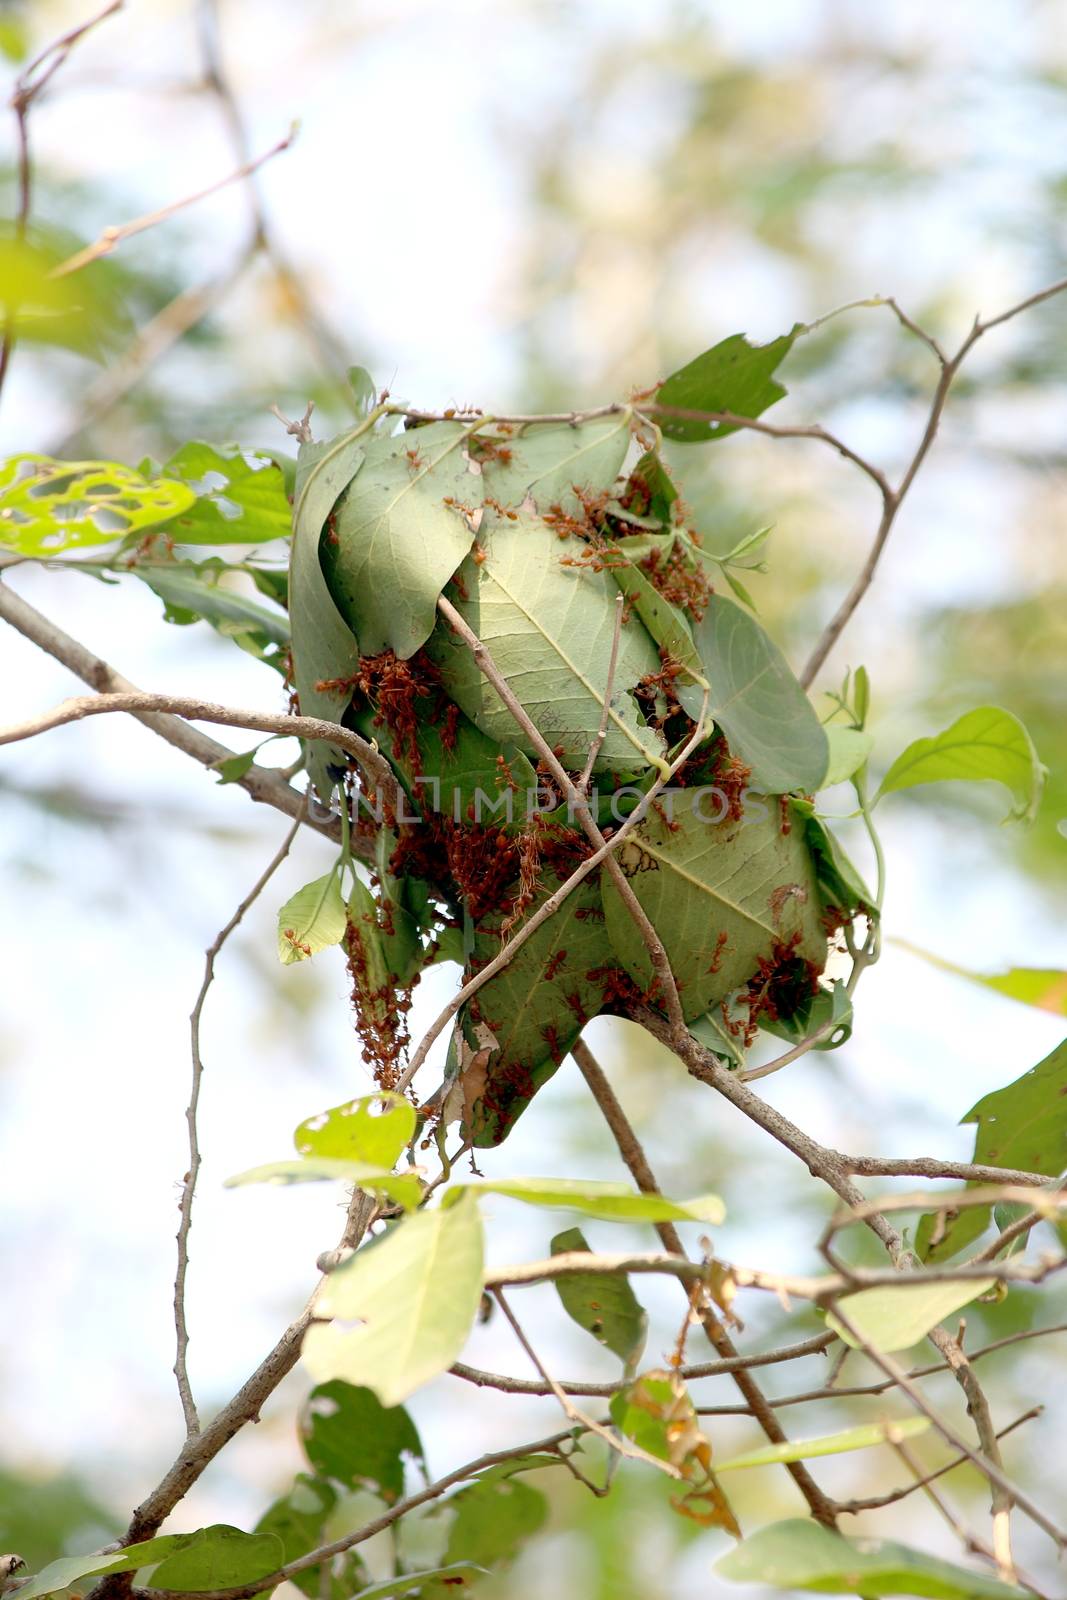 Ants, Red Ants, Ants nest on green leaves of a tree by joining together by cgdeaw